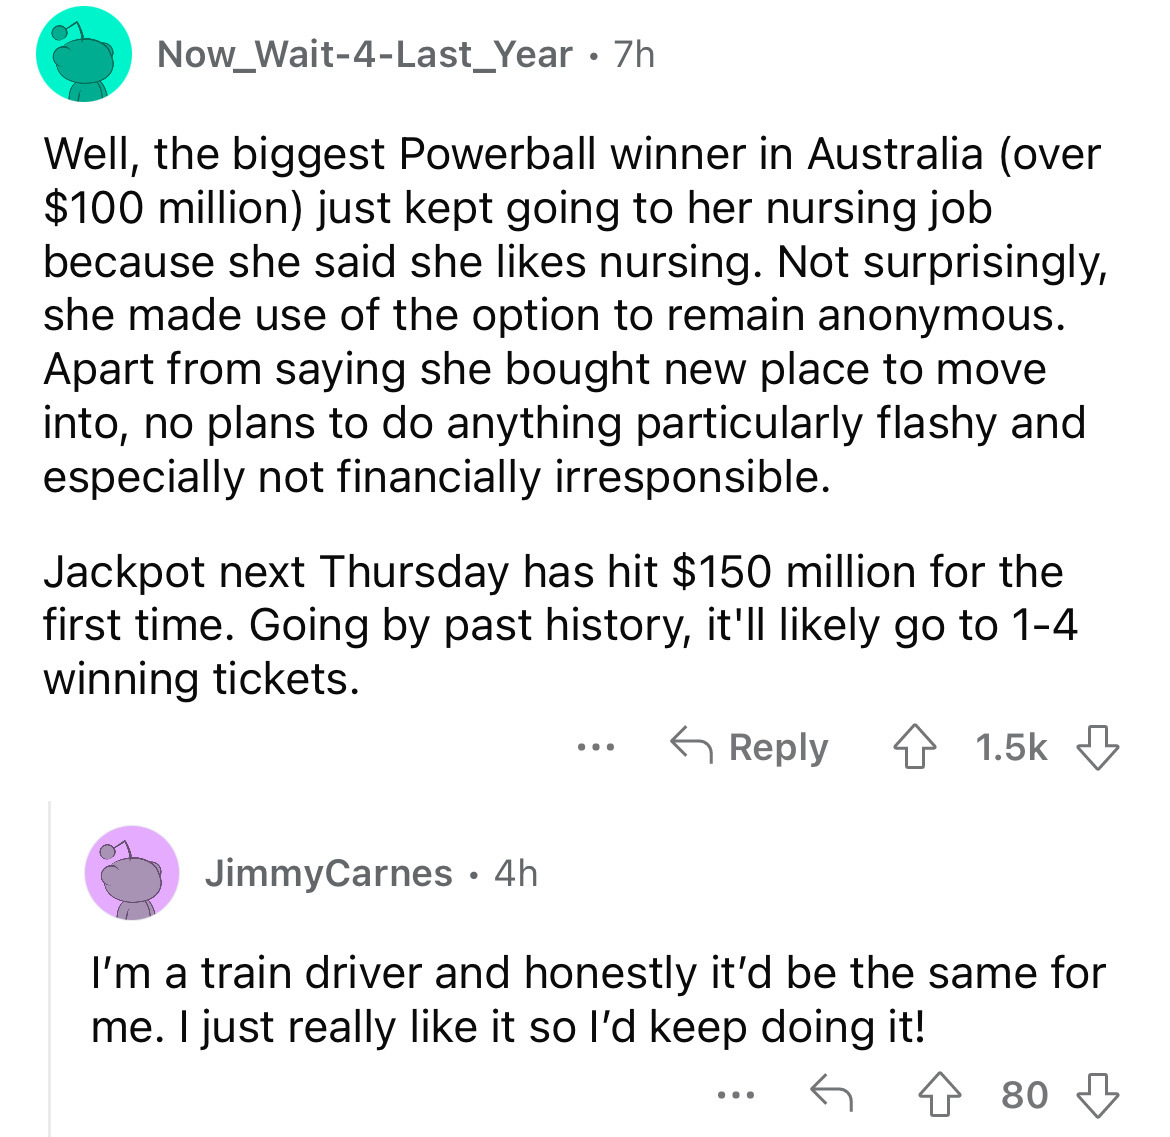 angle - Now Wait4Last Year 7h Well, the biggest Powerball winner in Australia over $100 million just kept going to her nursing job because she said she nursing. Not surprisingly, she made use of the option to remain anonymous. Apart from saying she bought